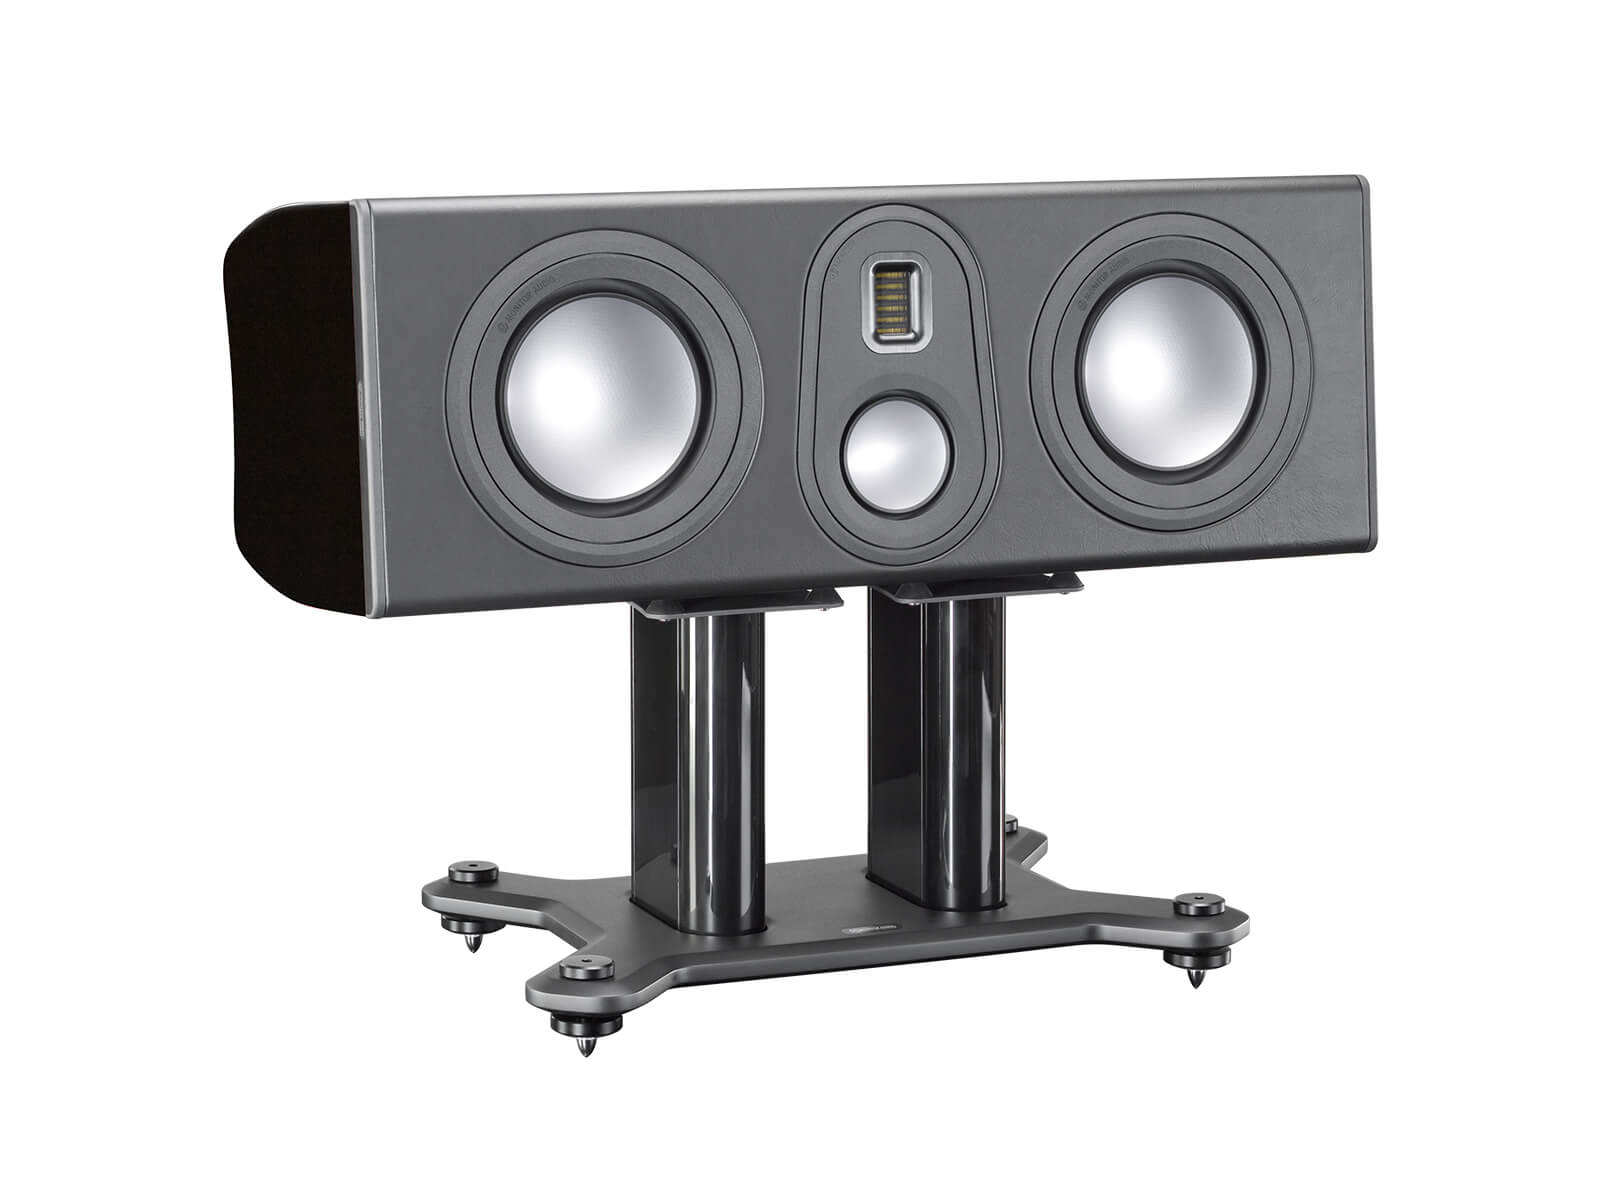 Platinum PLC350 II, centre channel speakers, featuring a grille and a santos rosewood real wood veneer finish.